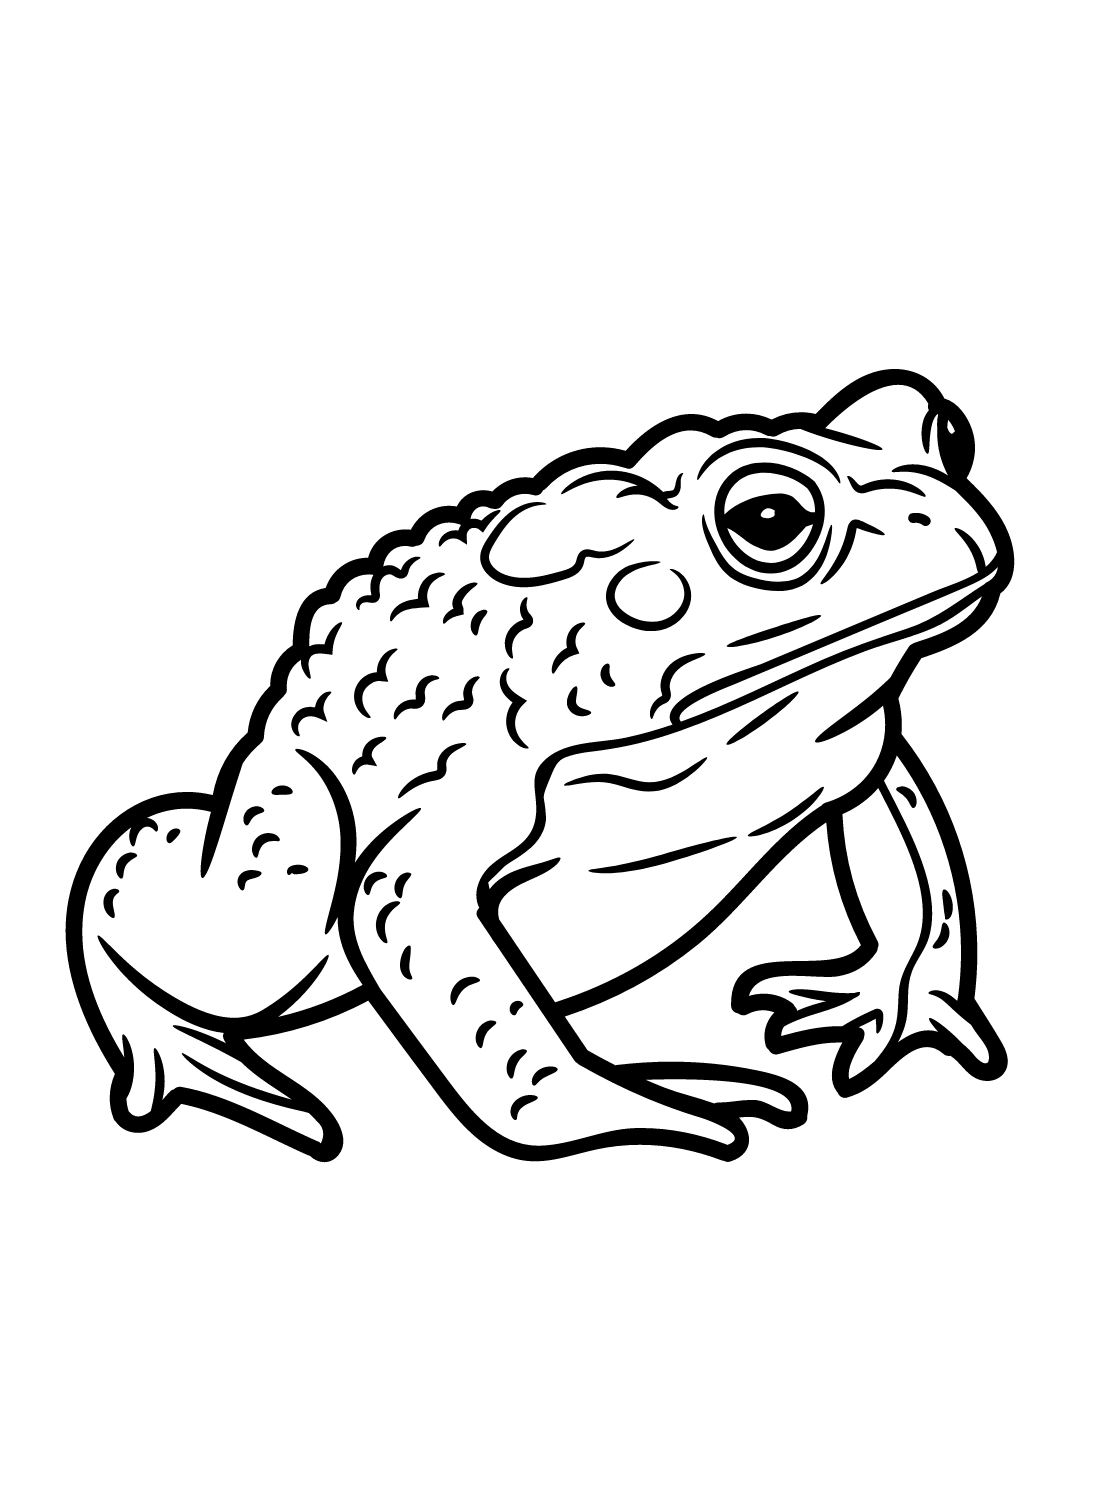 Toad coloring pages printable for free download